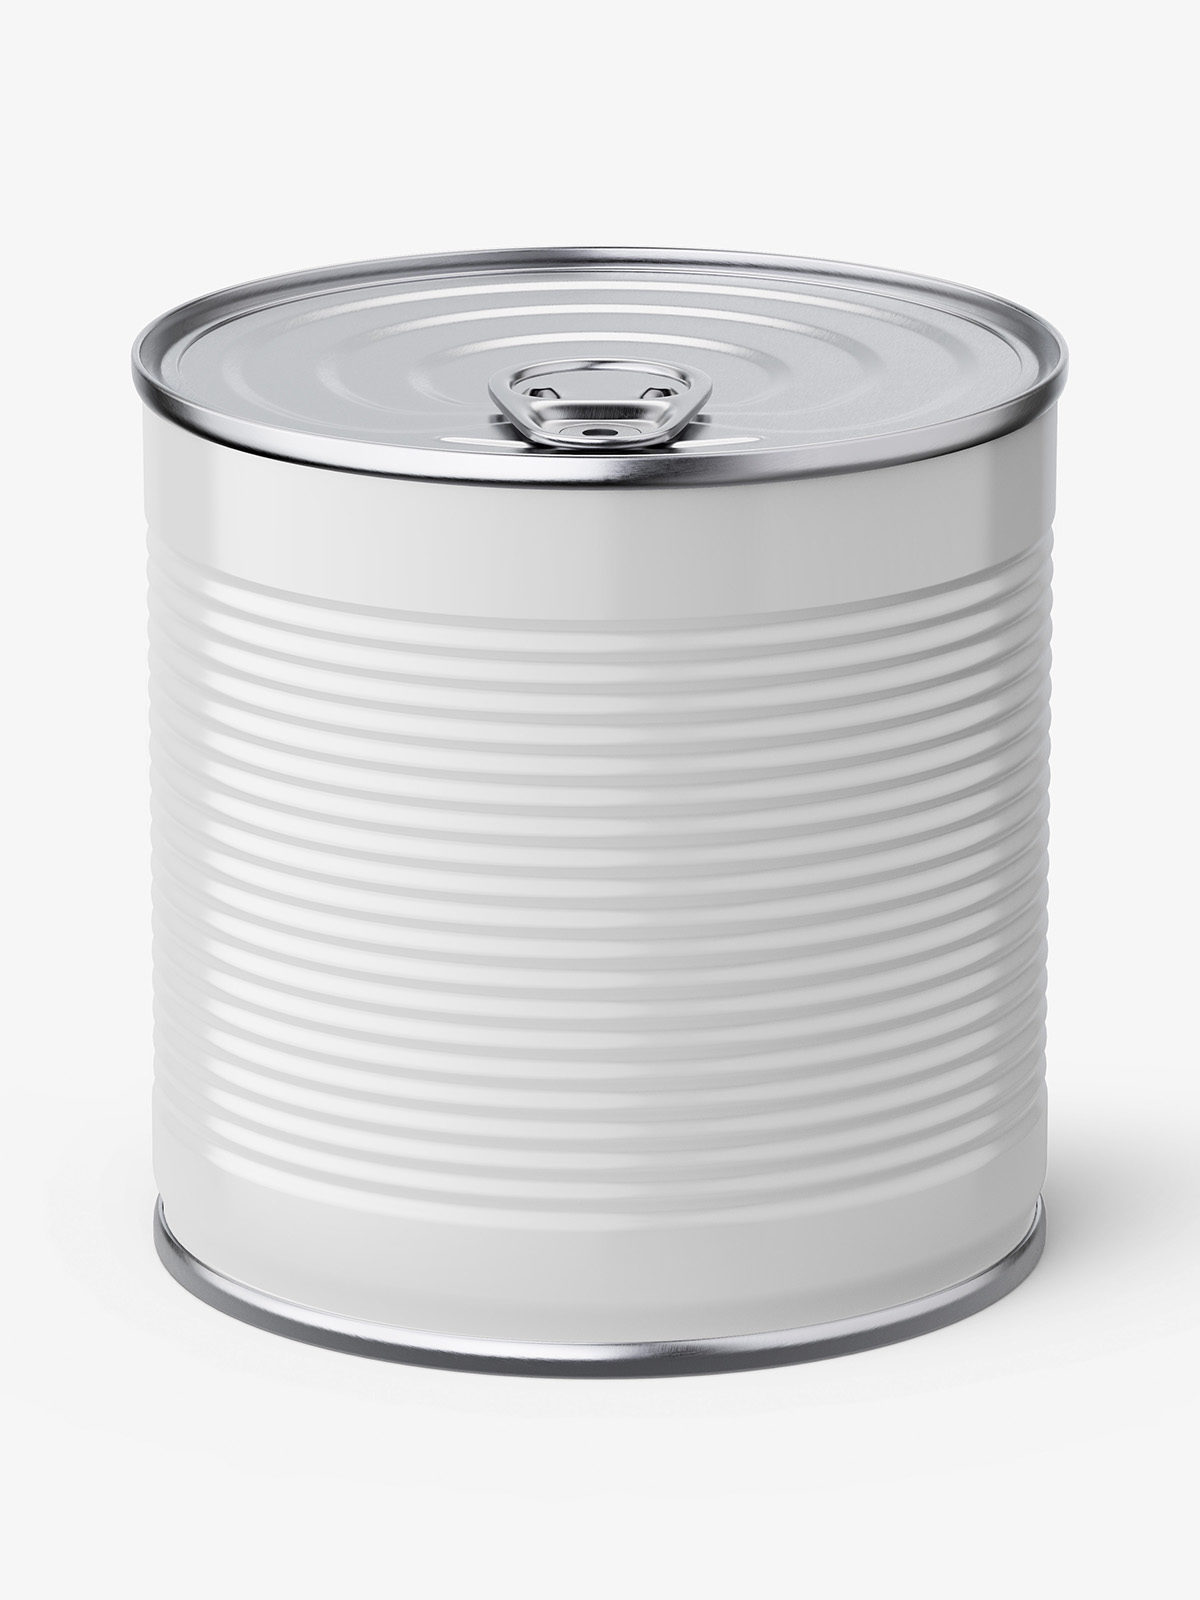 Download Glossy Tin Can Mockup 425 Ml Top View Smarty Mockups